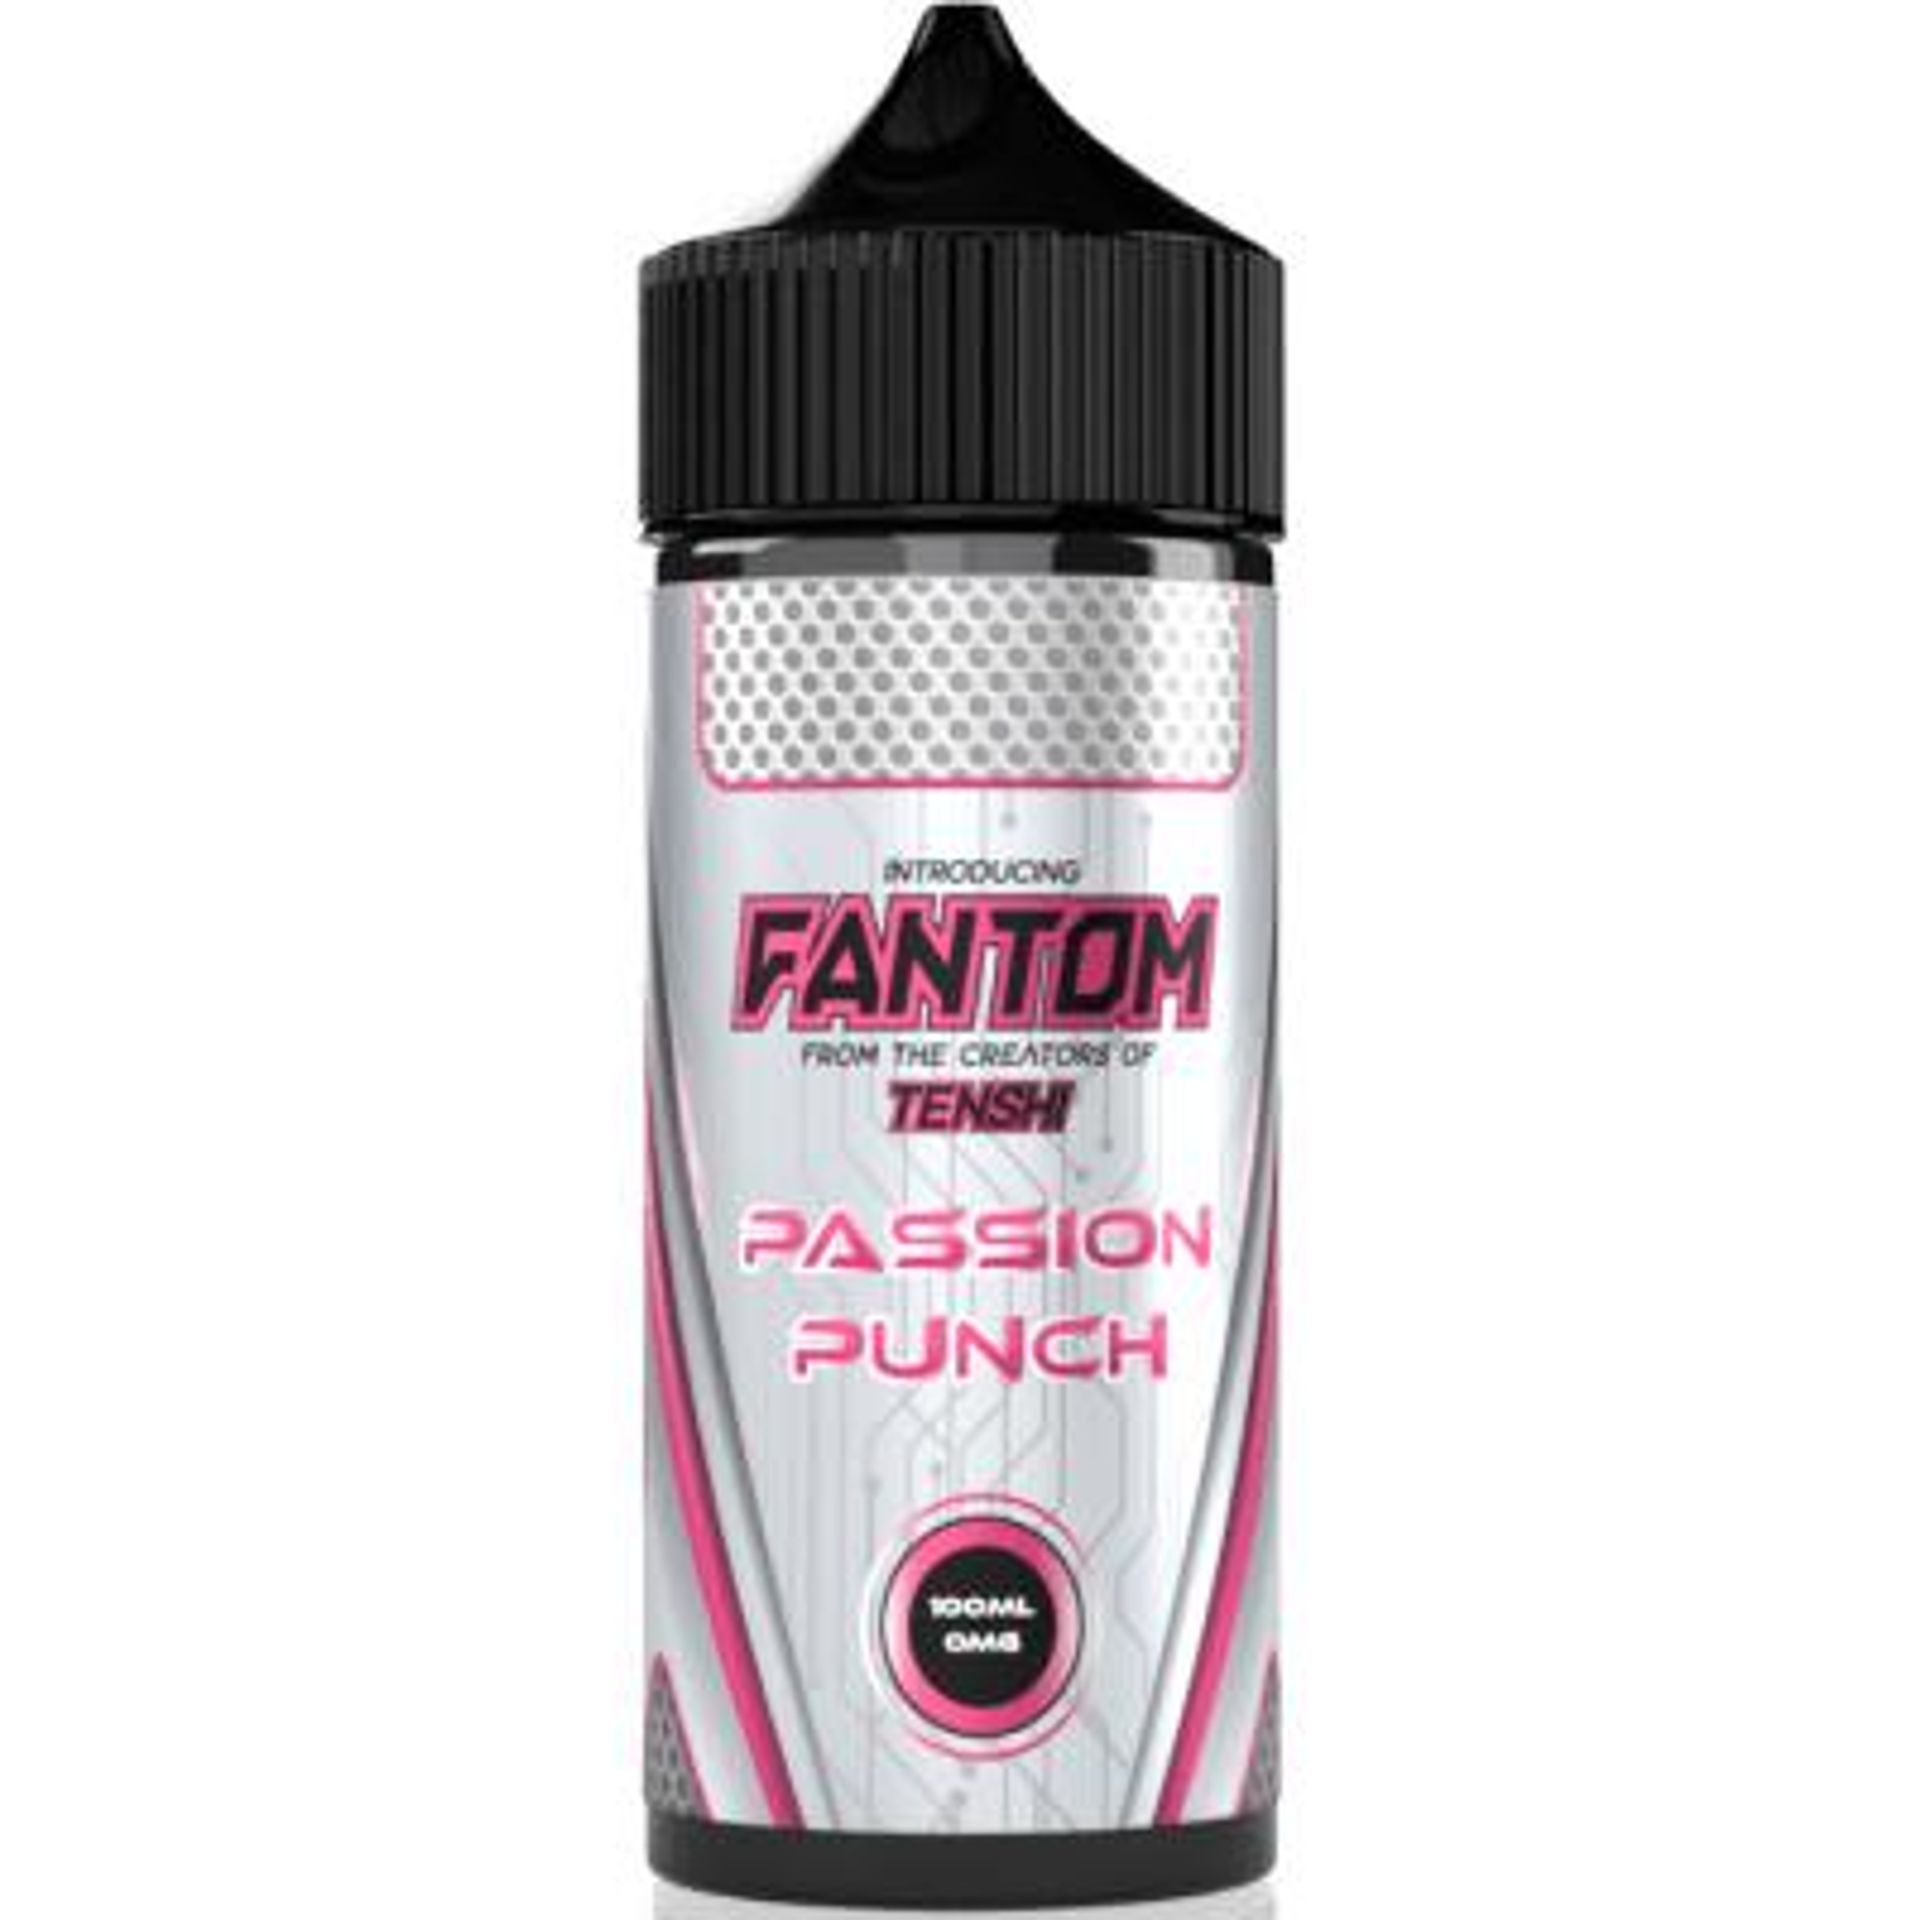 Image of Passion Punch by Fantom by Tenshi